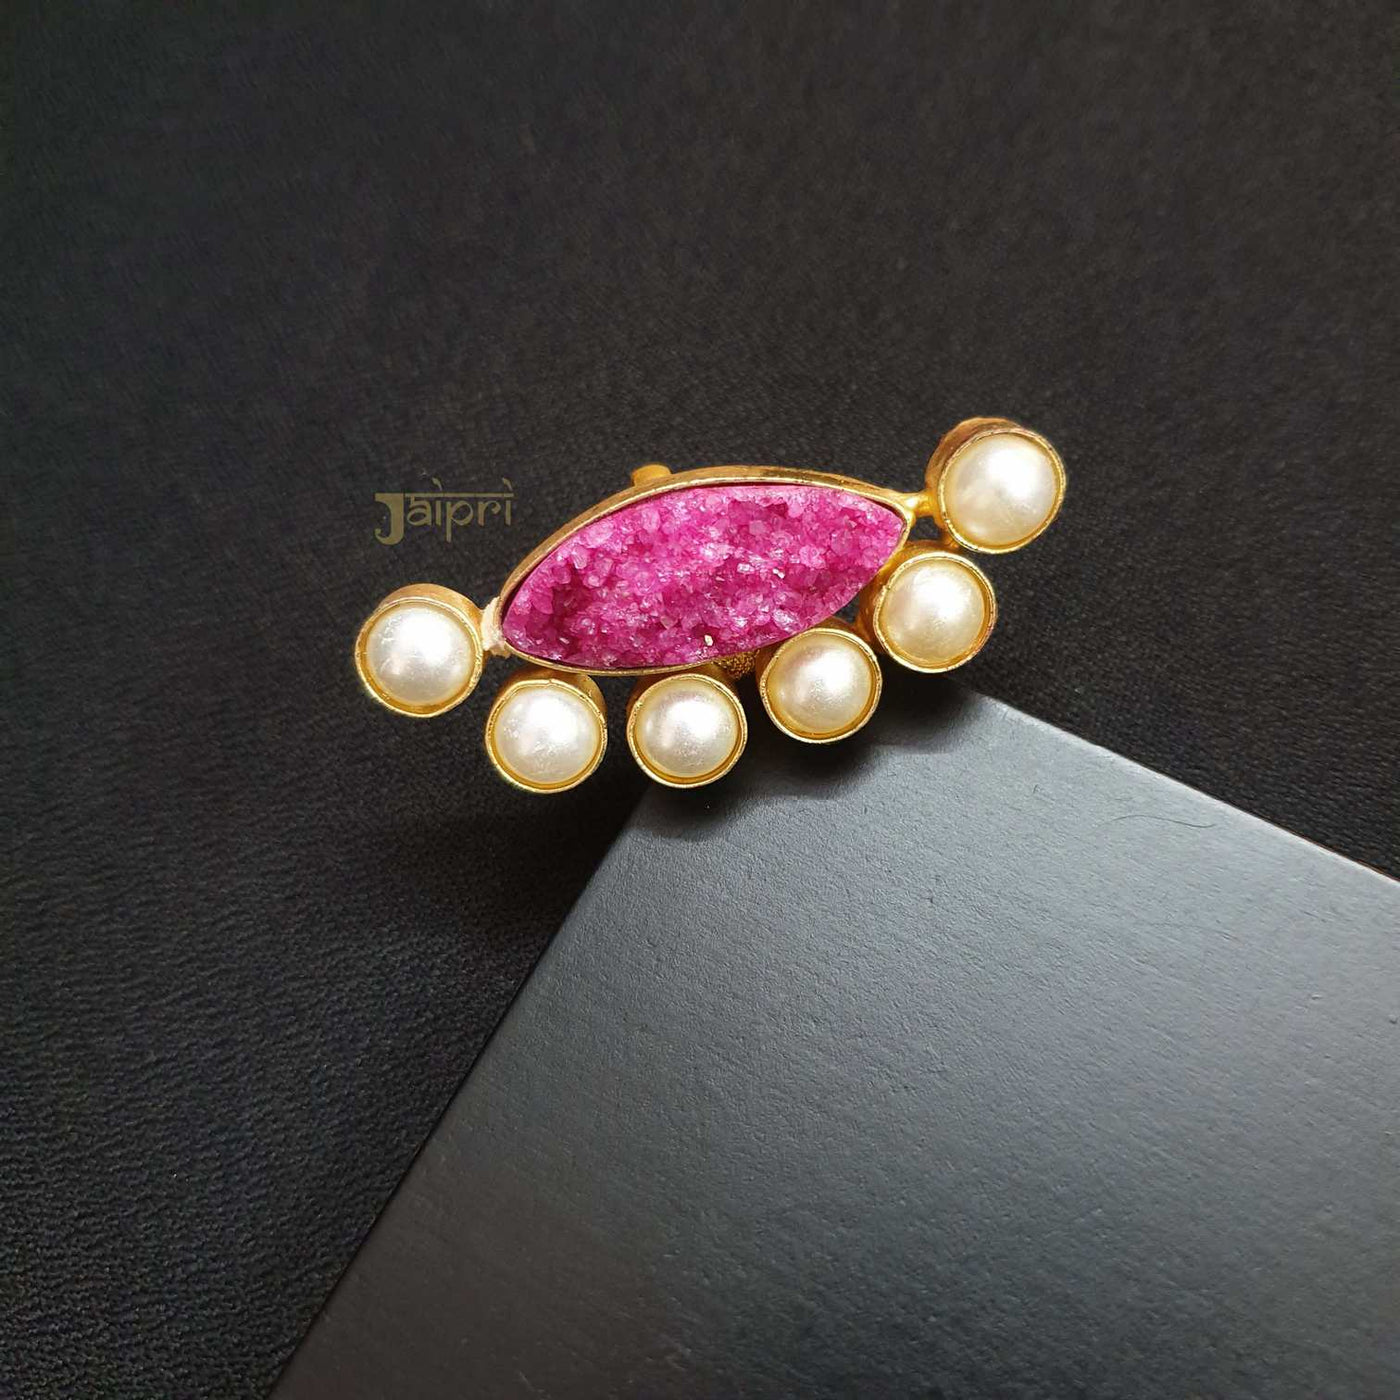 Adorable Pink Eye & Pearl Stone Ring